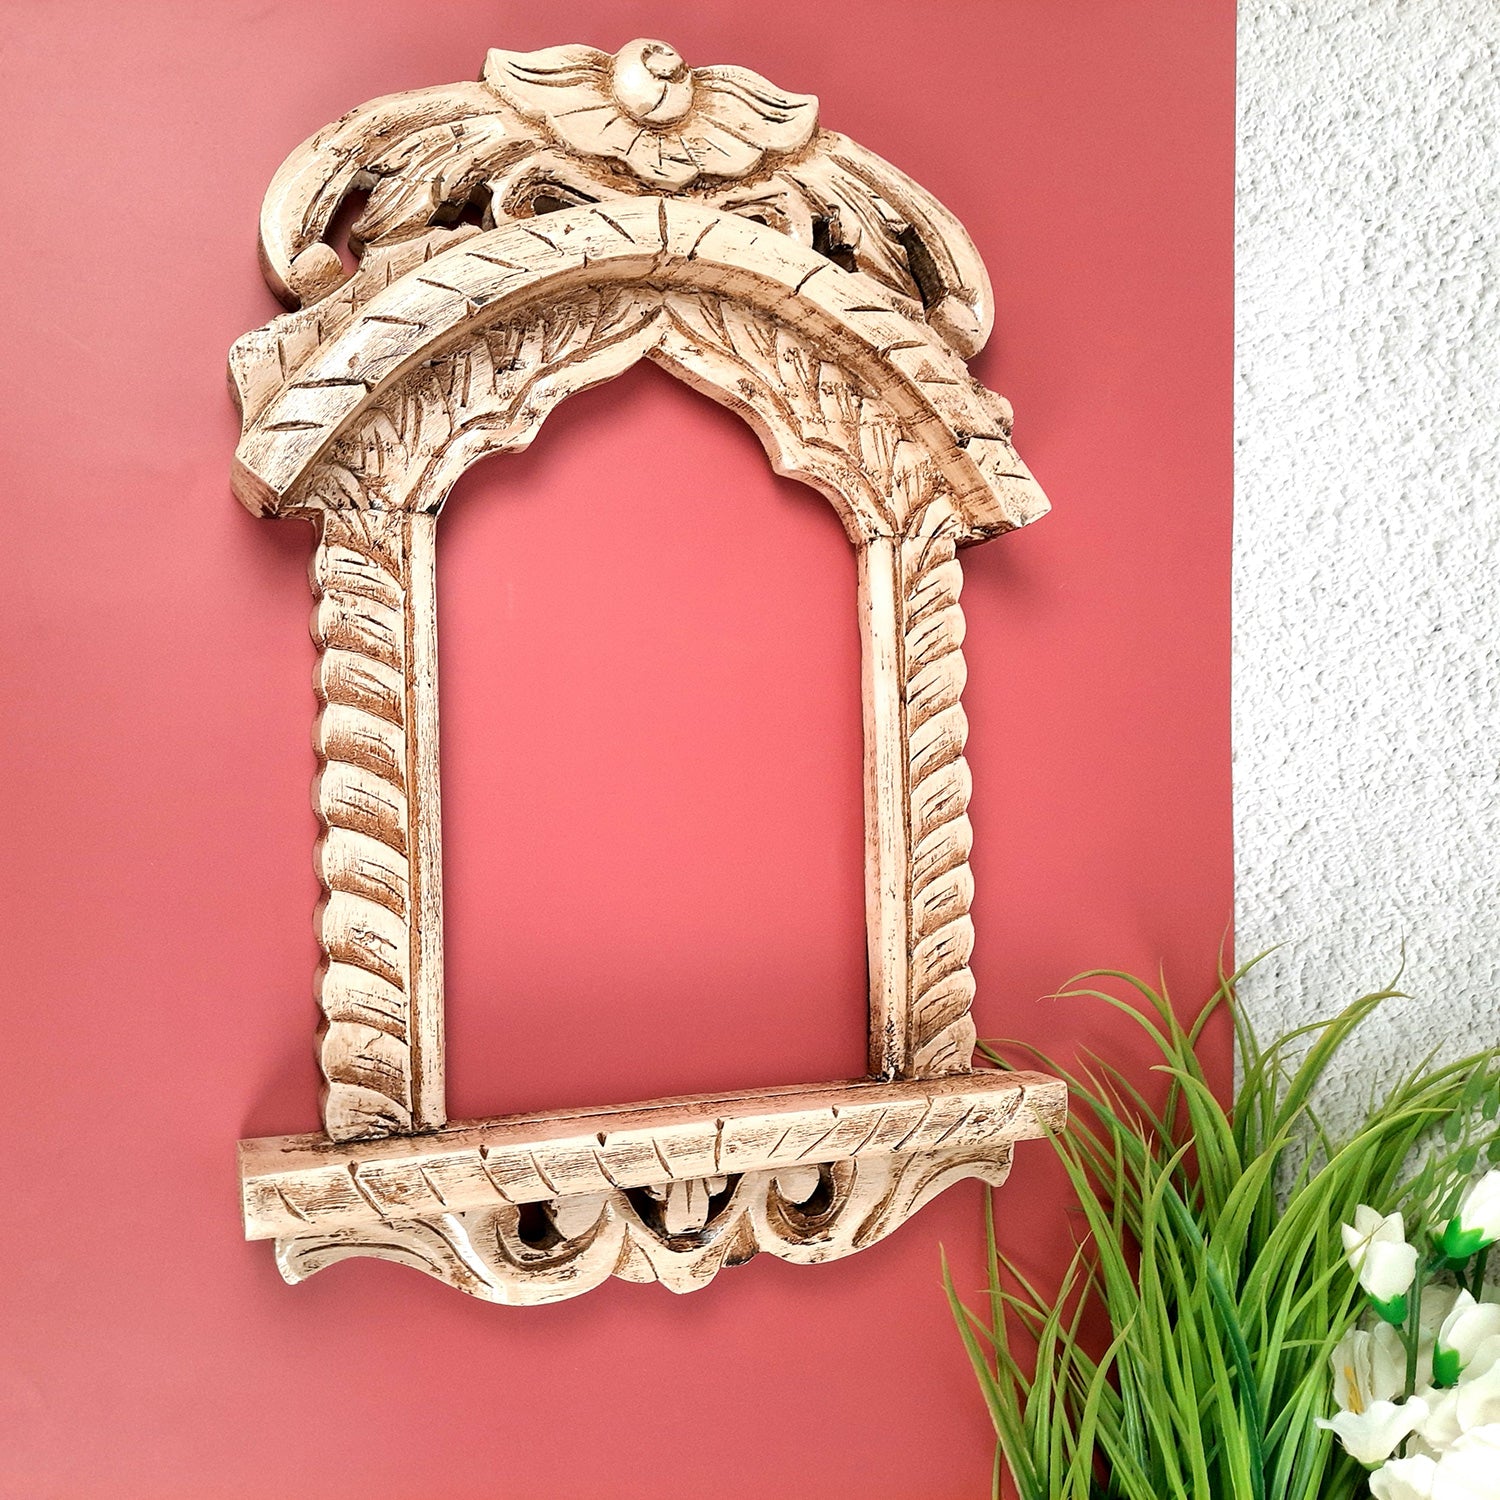 Jharokha Wall Hanging | Wooden Jharokha Frame Hangings - For Home, Wall Decor, Frames, Living room, Entrance Decoration & Gifts - 19 Inch - Apkamart